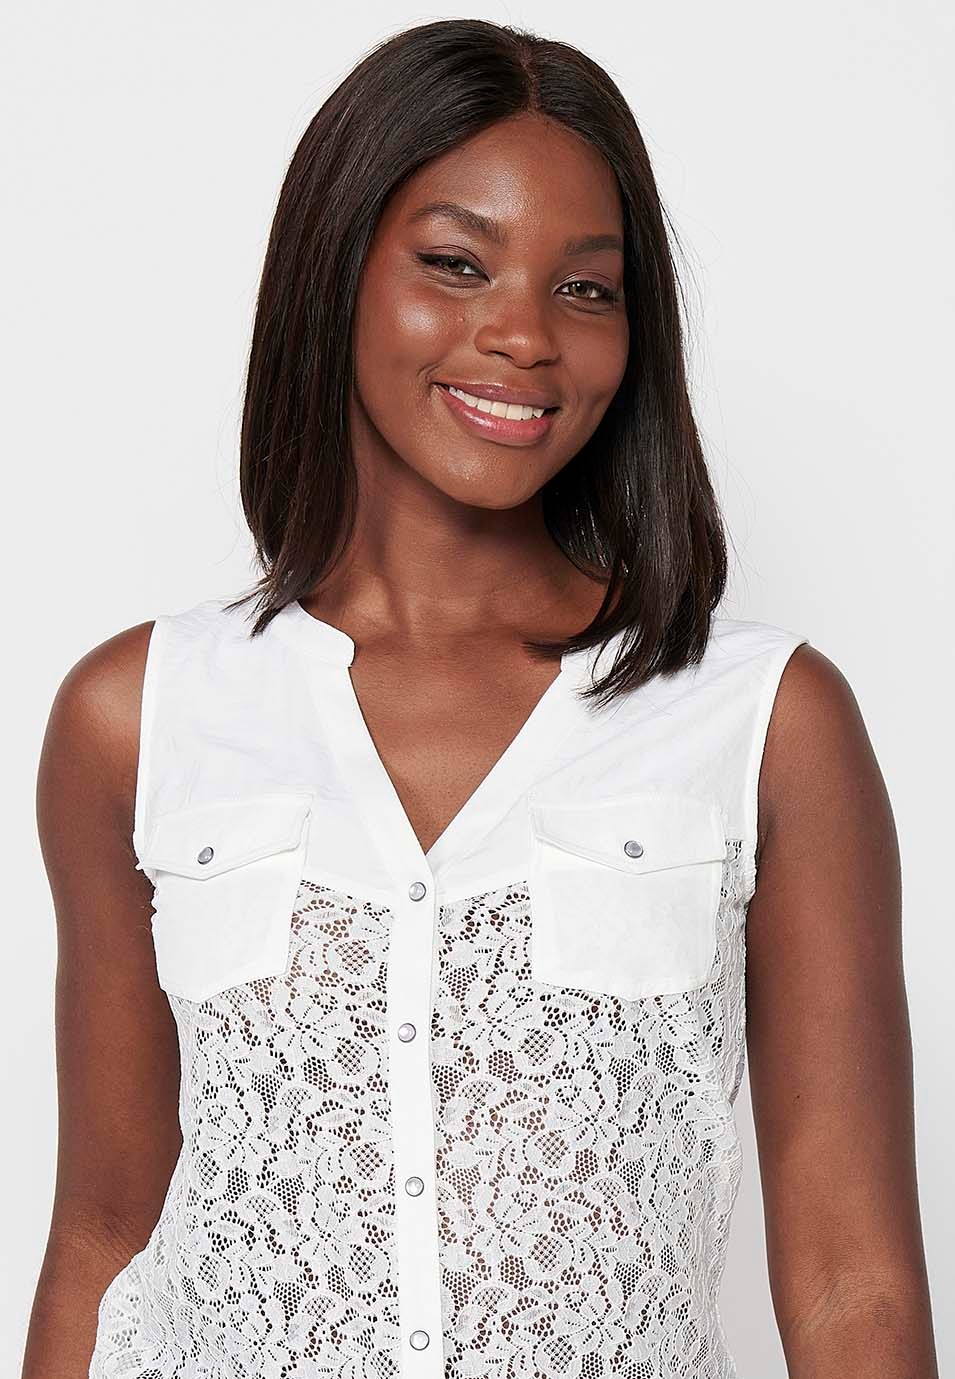 Sleeveless blouse, shirt collar and front buttons, white color for women